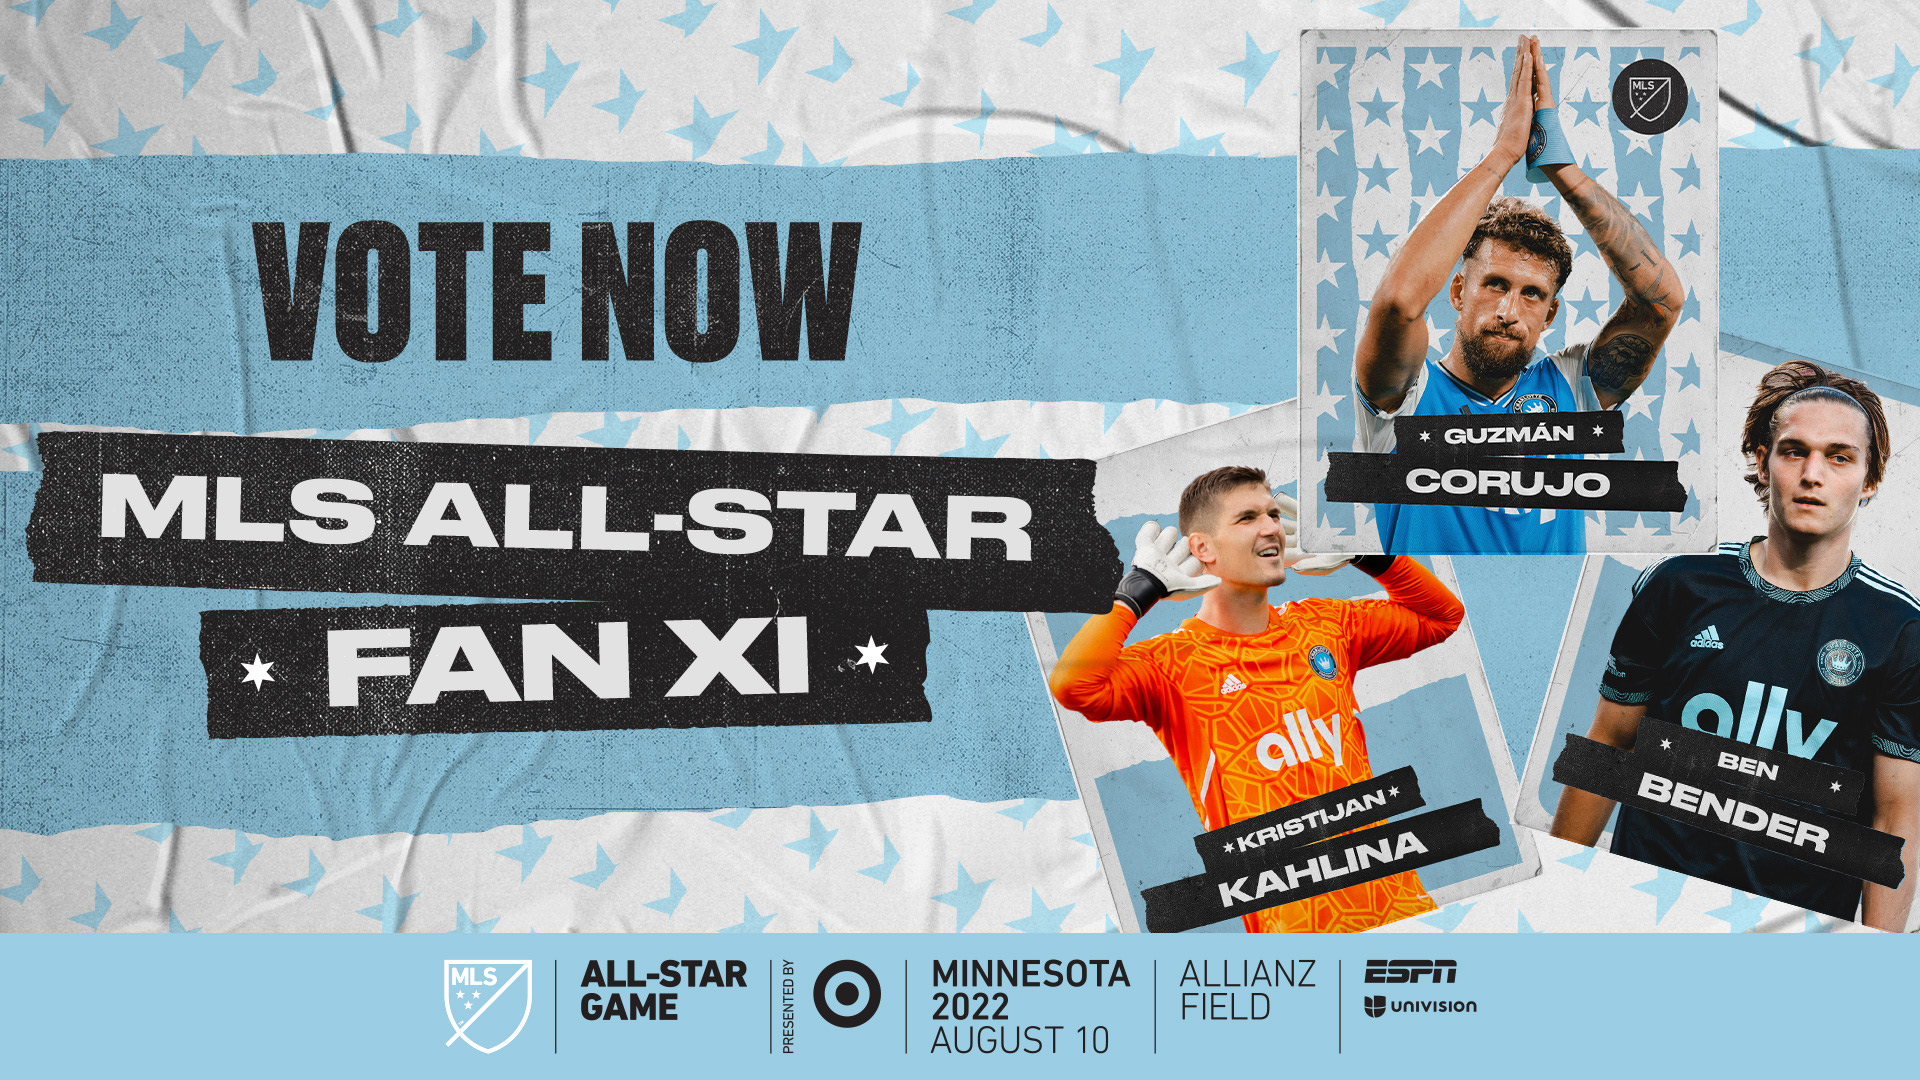 Voting Opens Today for 2022 MLS All-Star Game Presented by Target